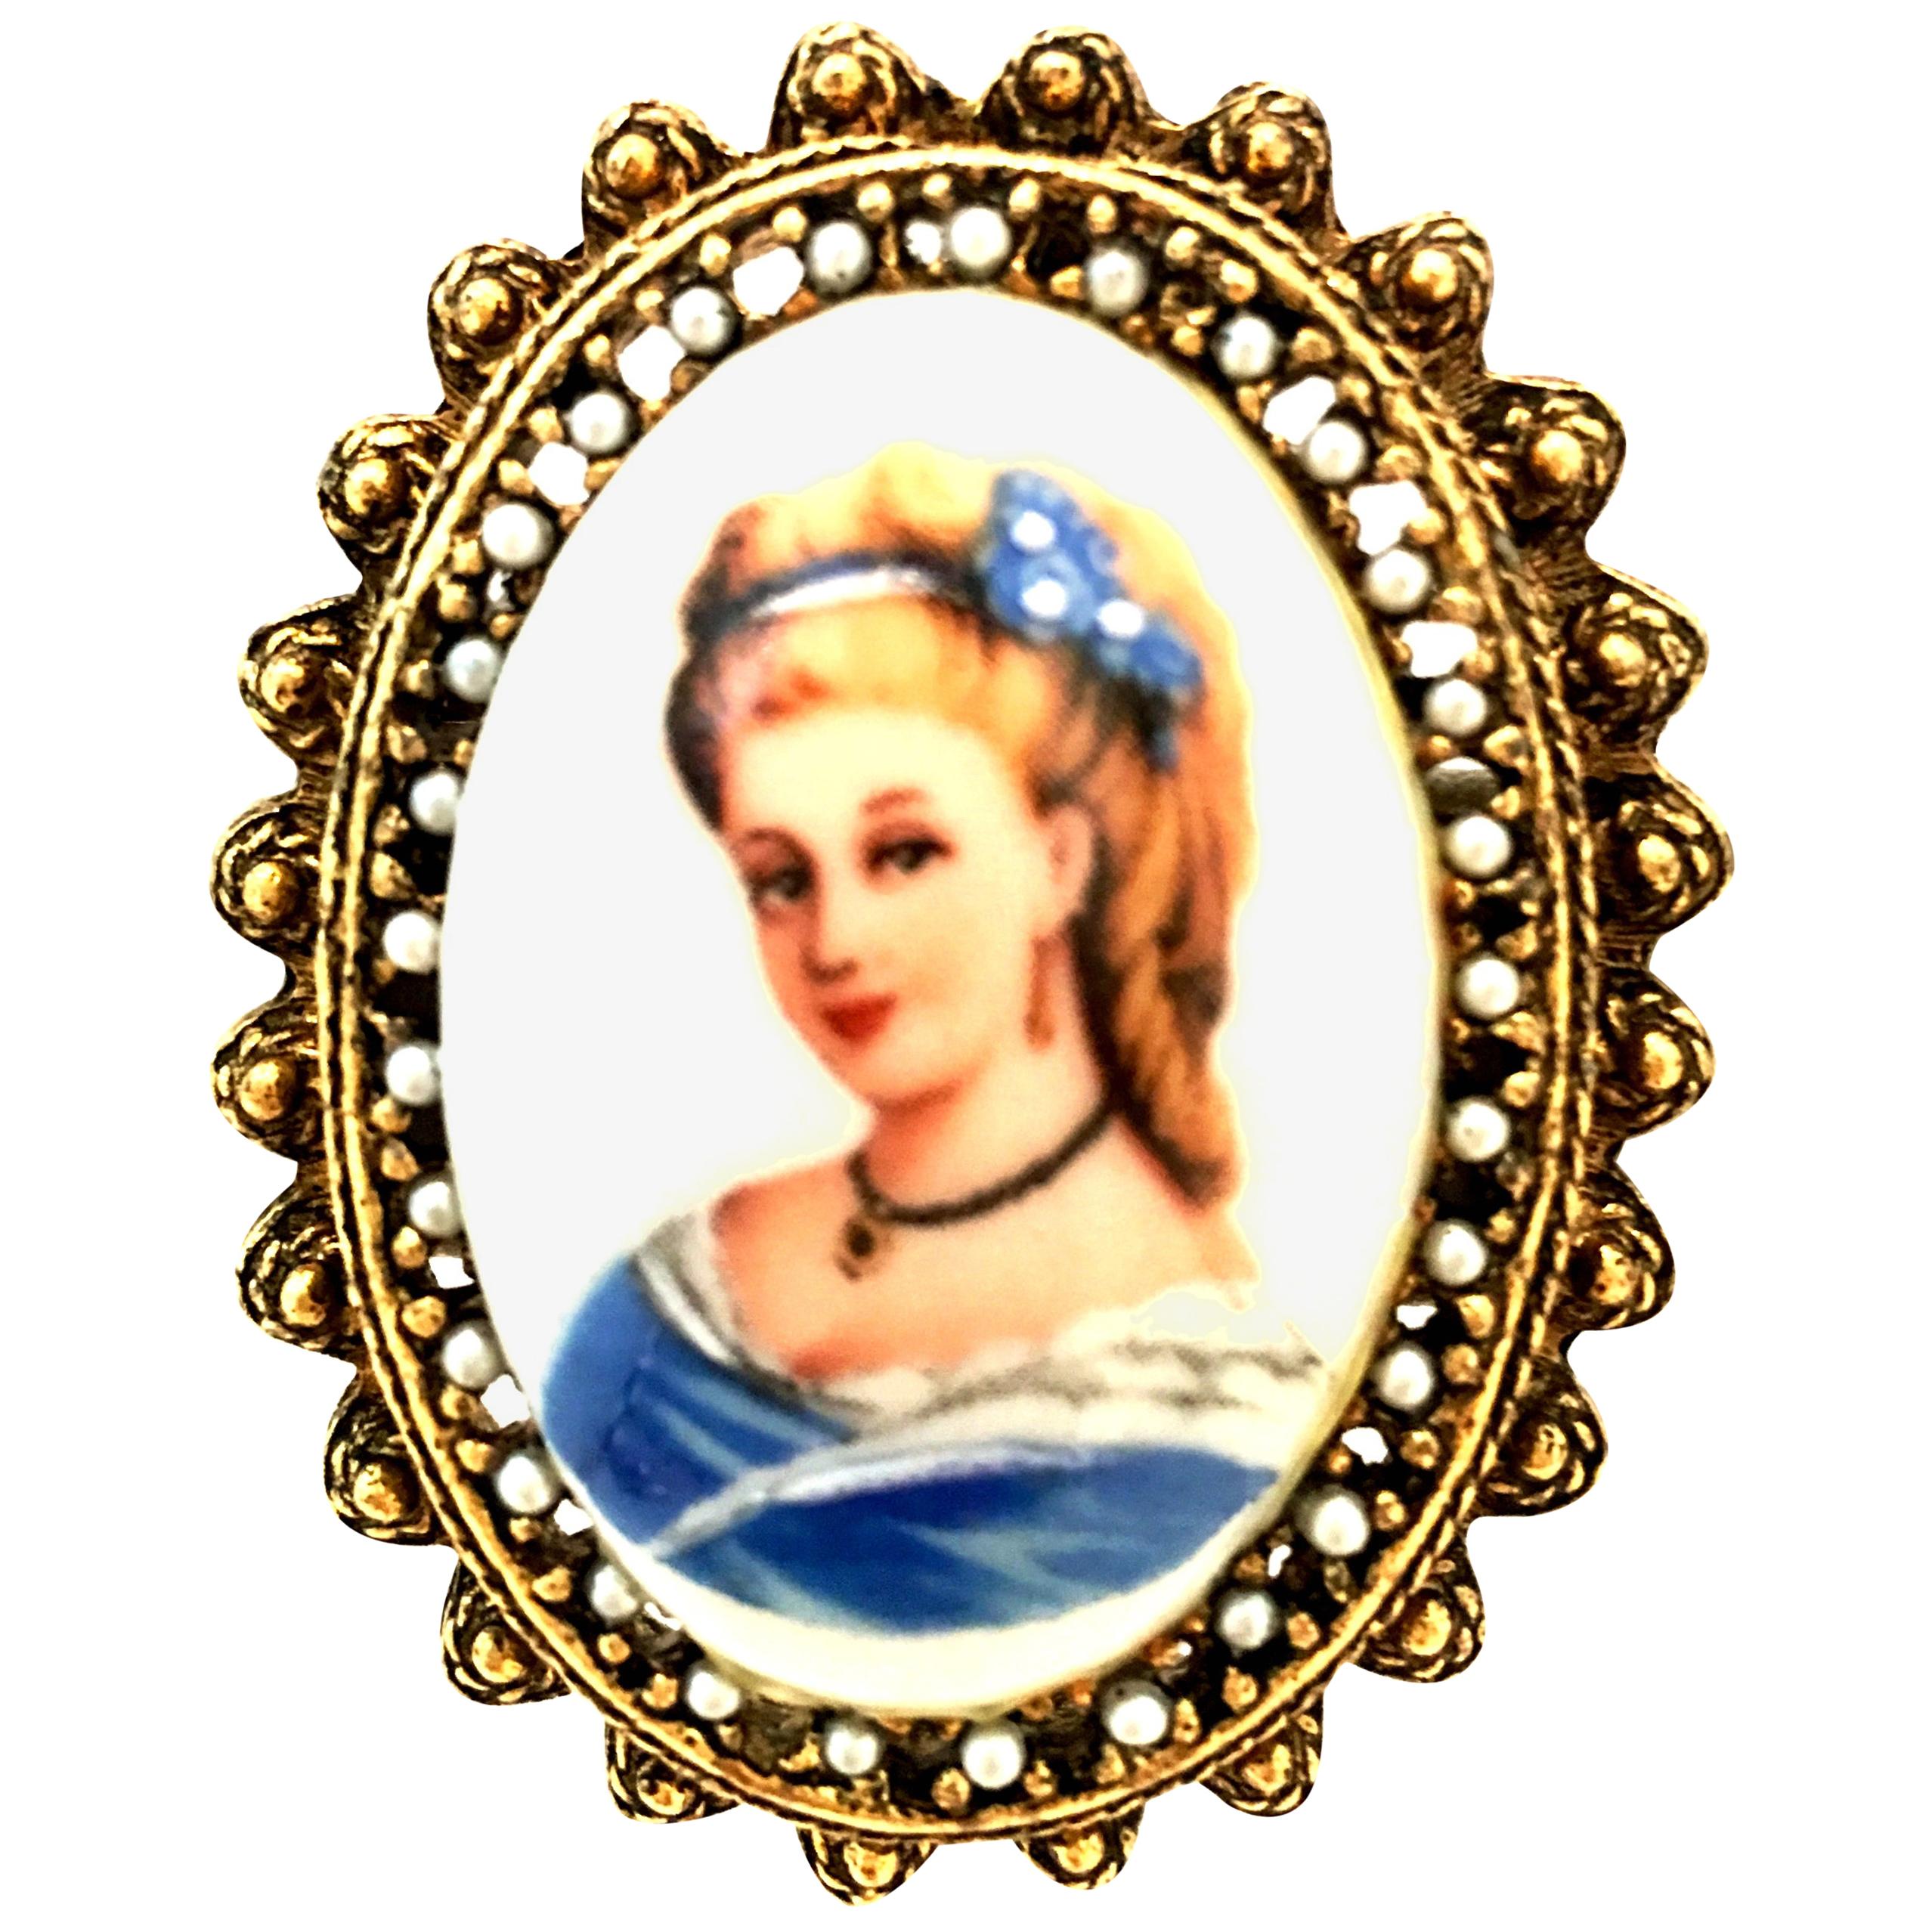 20th Century French Hand Painted Limoges Cameo Brooch & Necklace Pendant